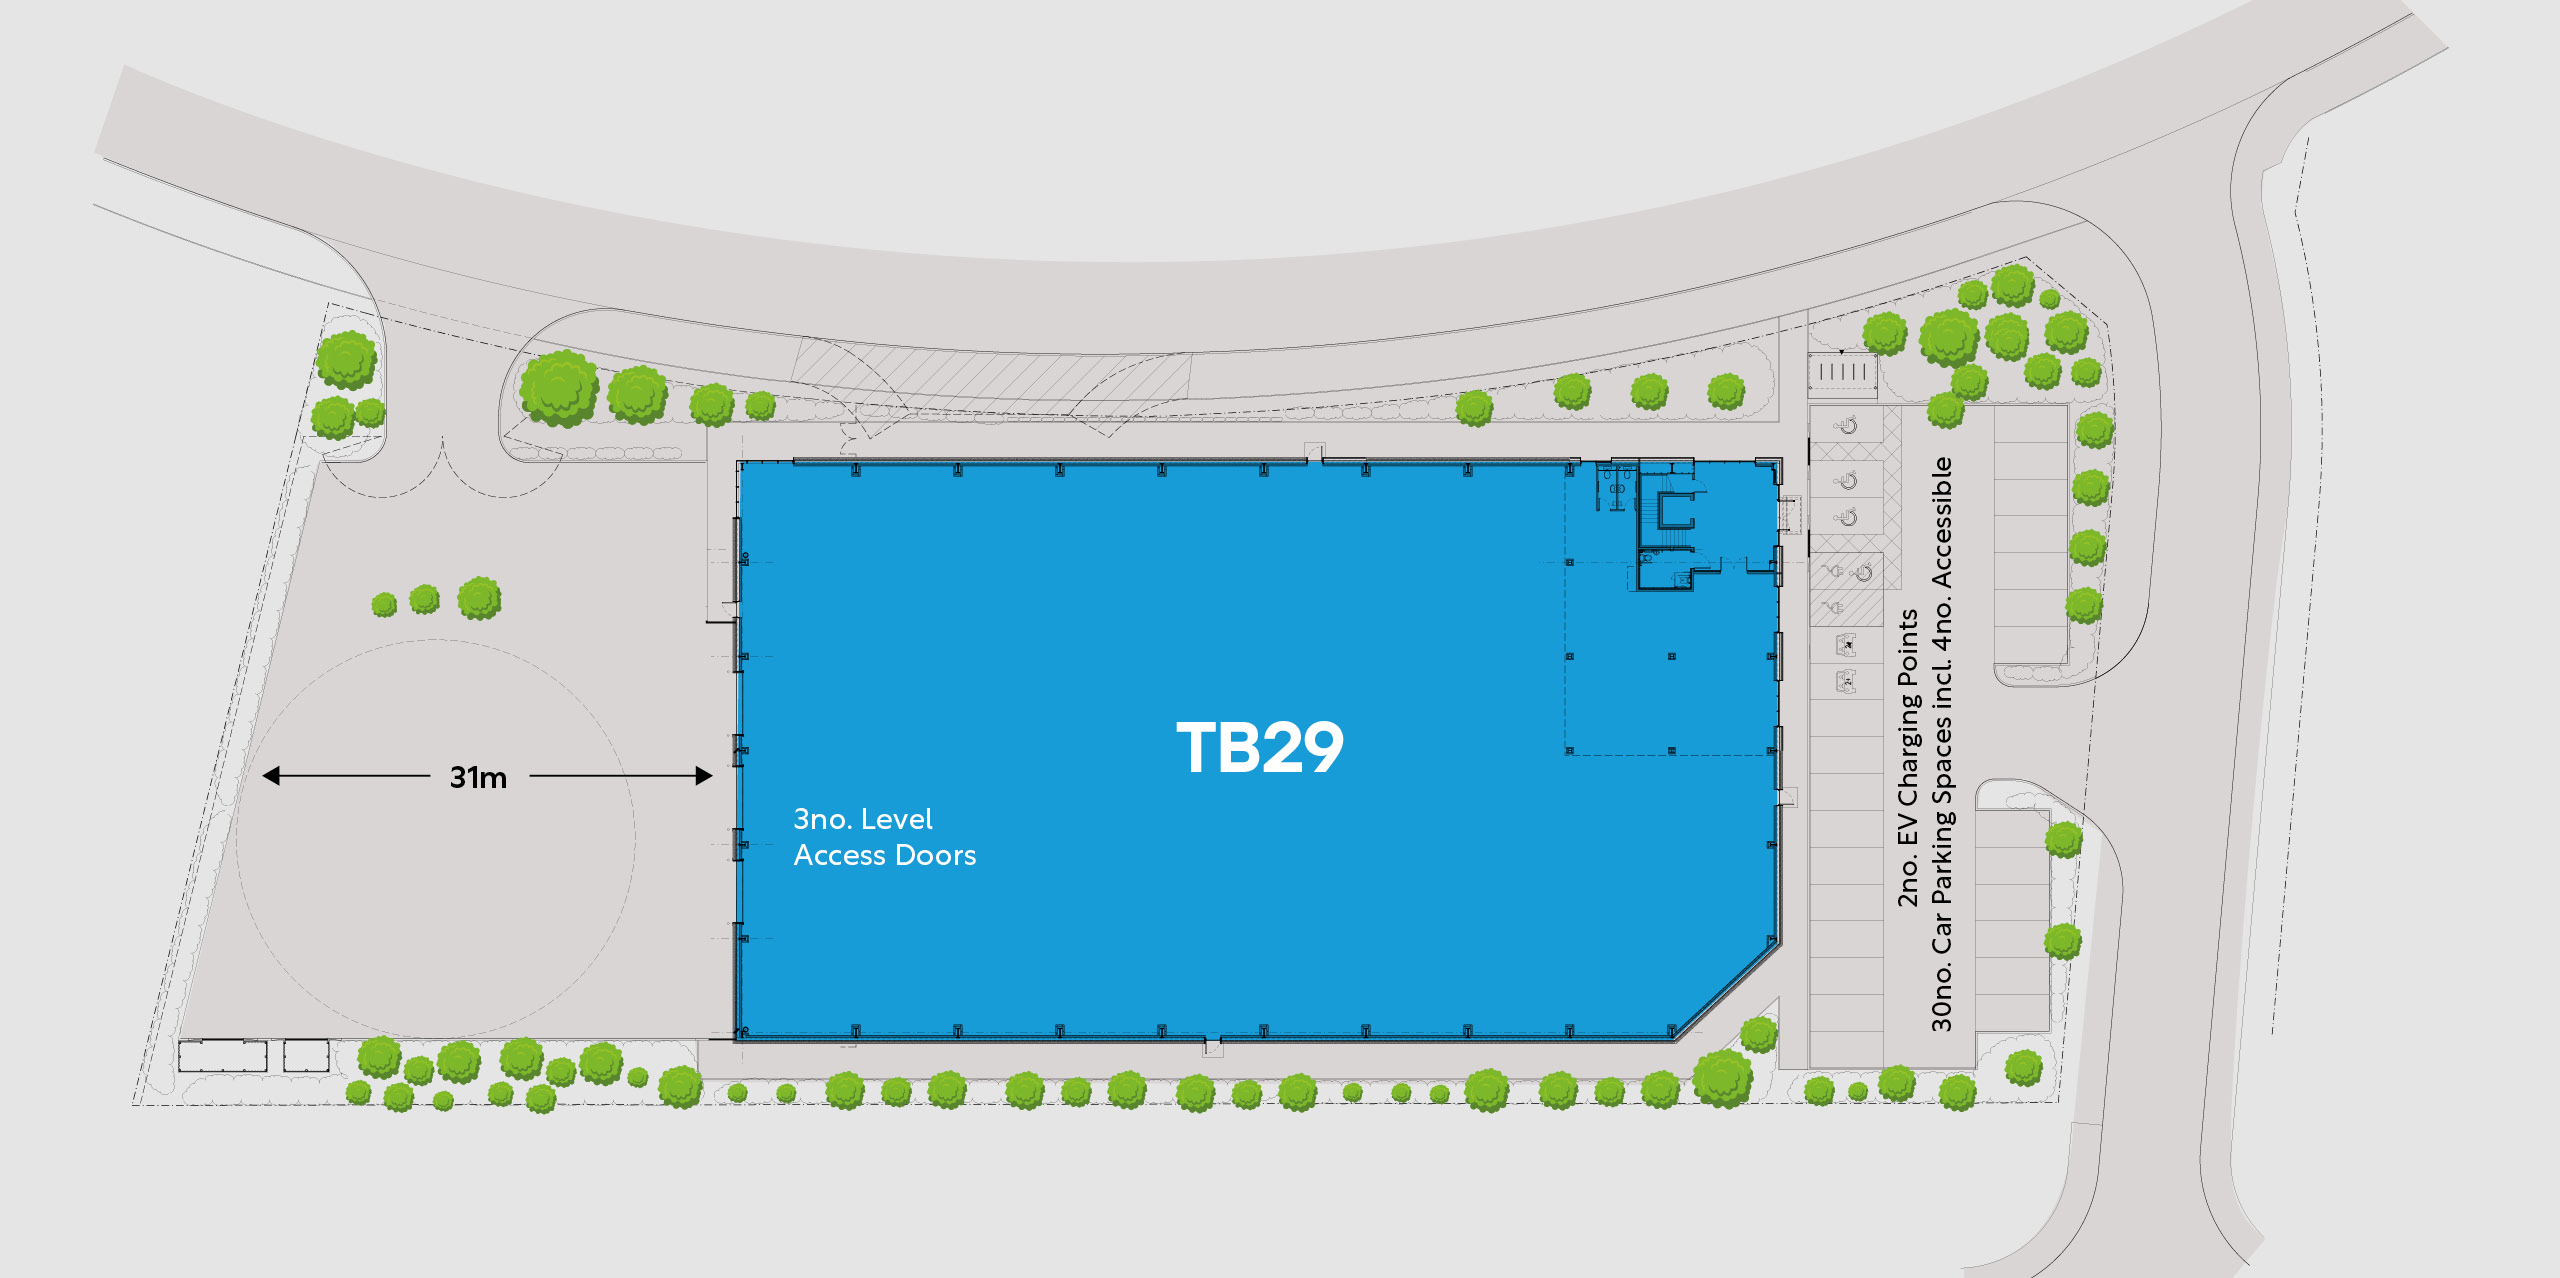 TB29 industrial warehouse unit site plan showing distances and key features. CGI.